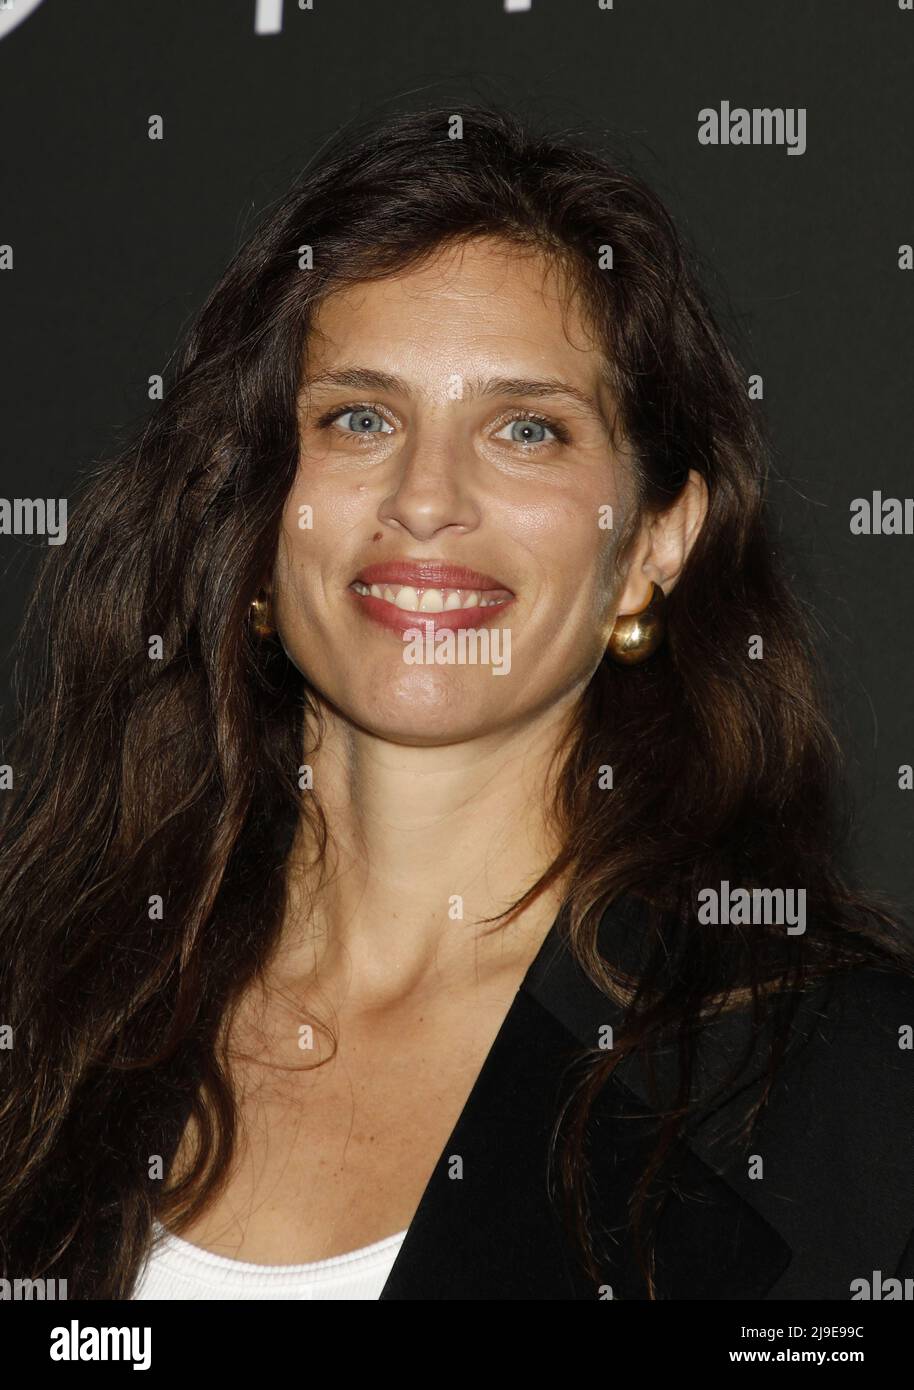 Maiwenn le Besco  attends the annual Kering 'Women in Motion' awards at Place de la Castre on May 22, 2022 in Cannes, France. Photo: DGP/imageSPACE/Sipa USA Stock Photo